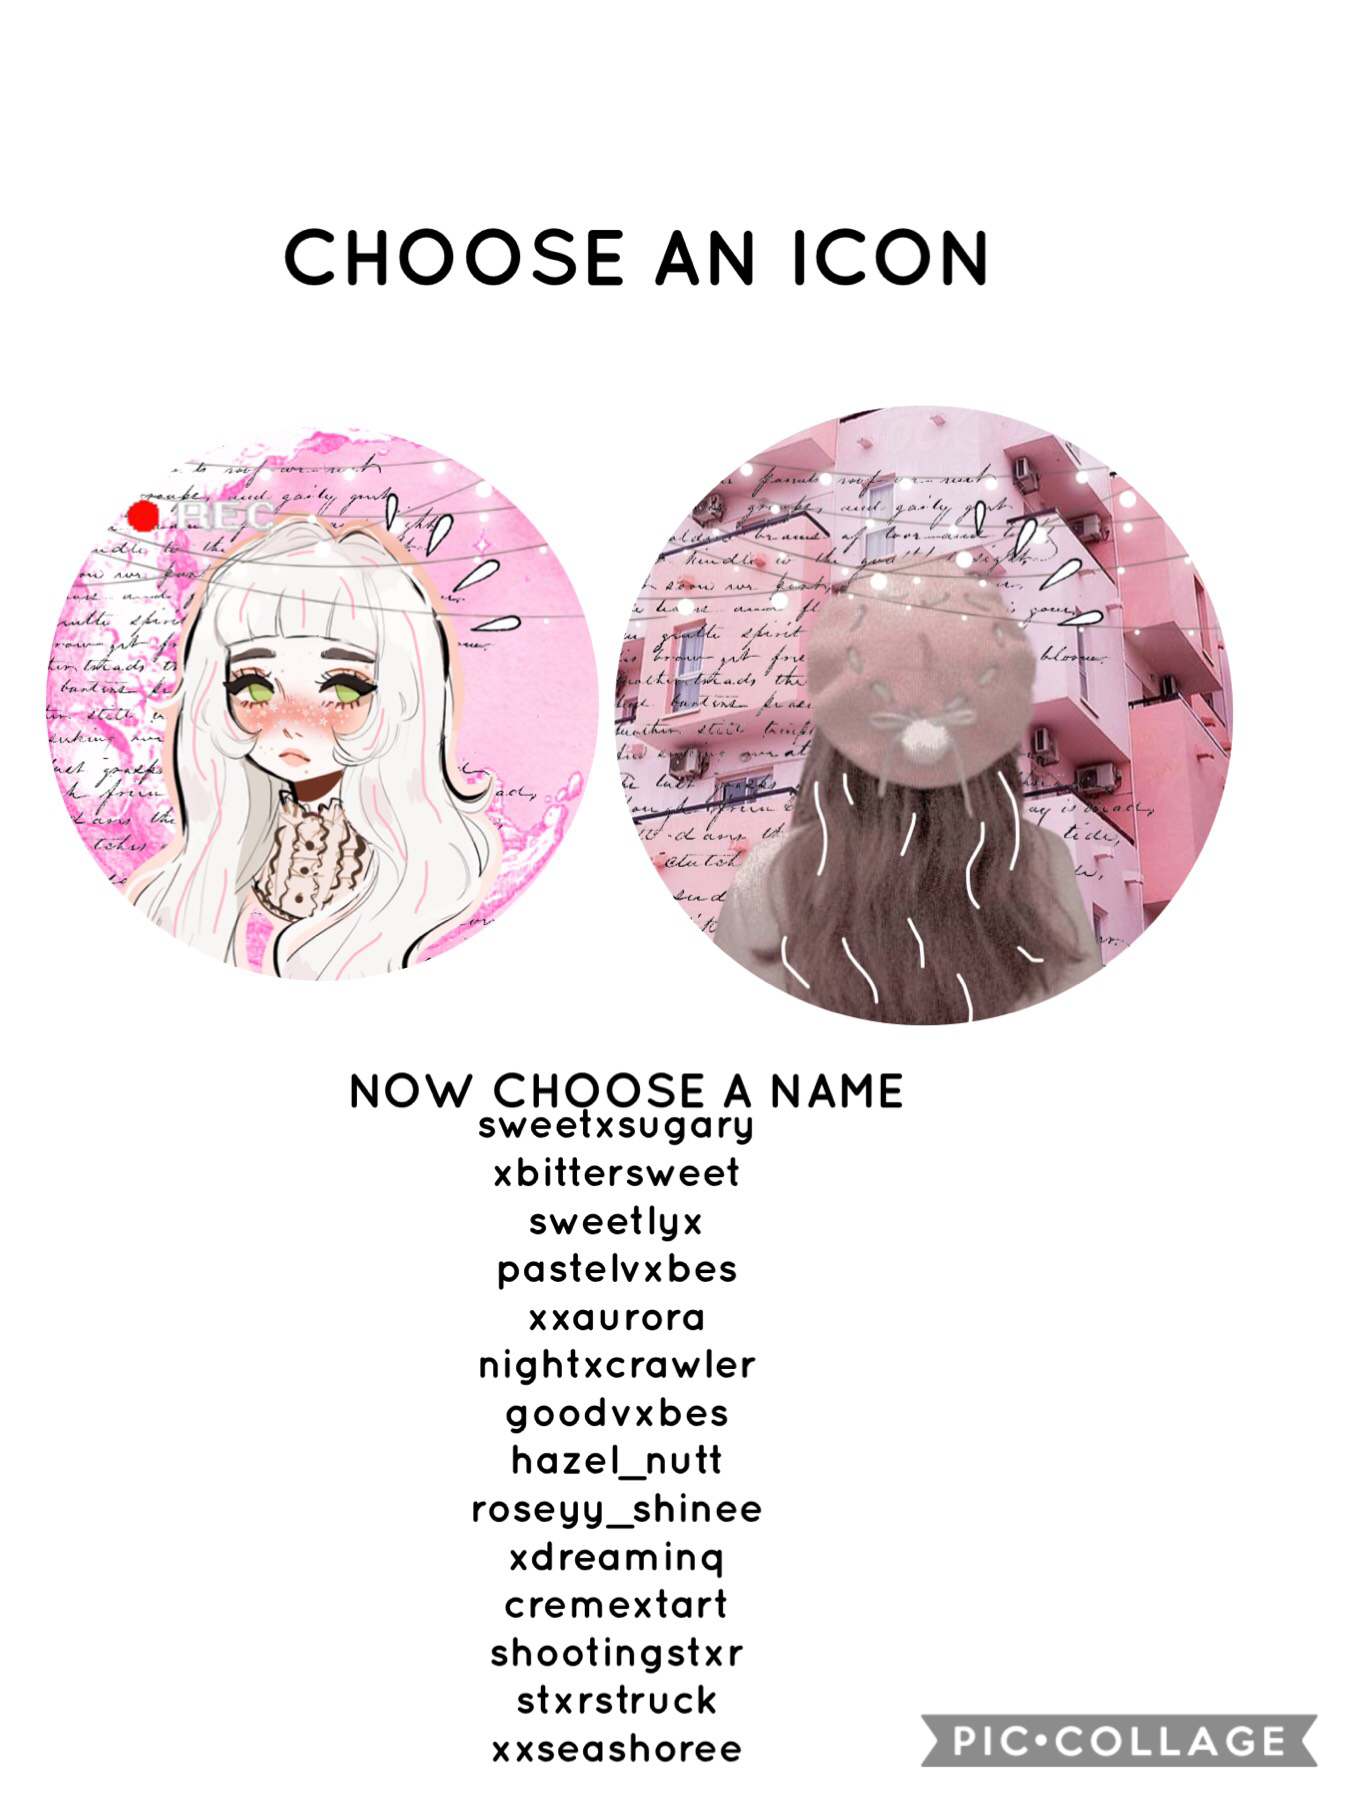 choose (say in comments)